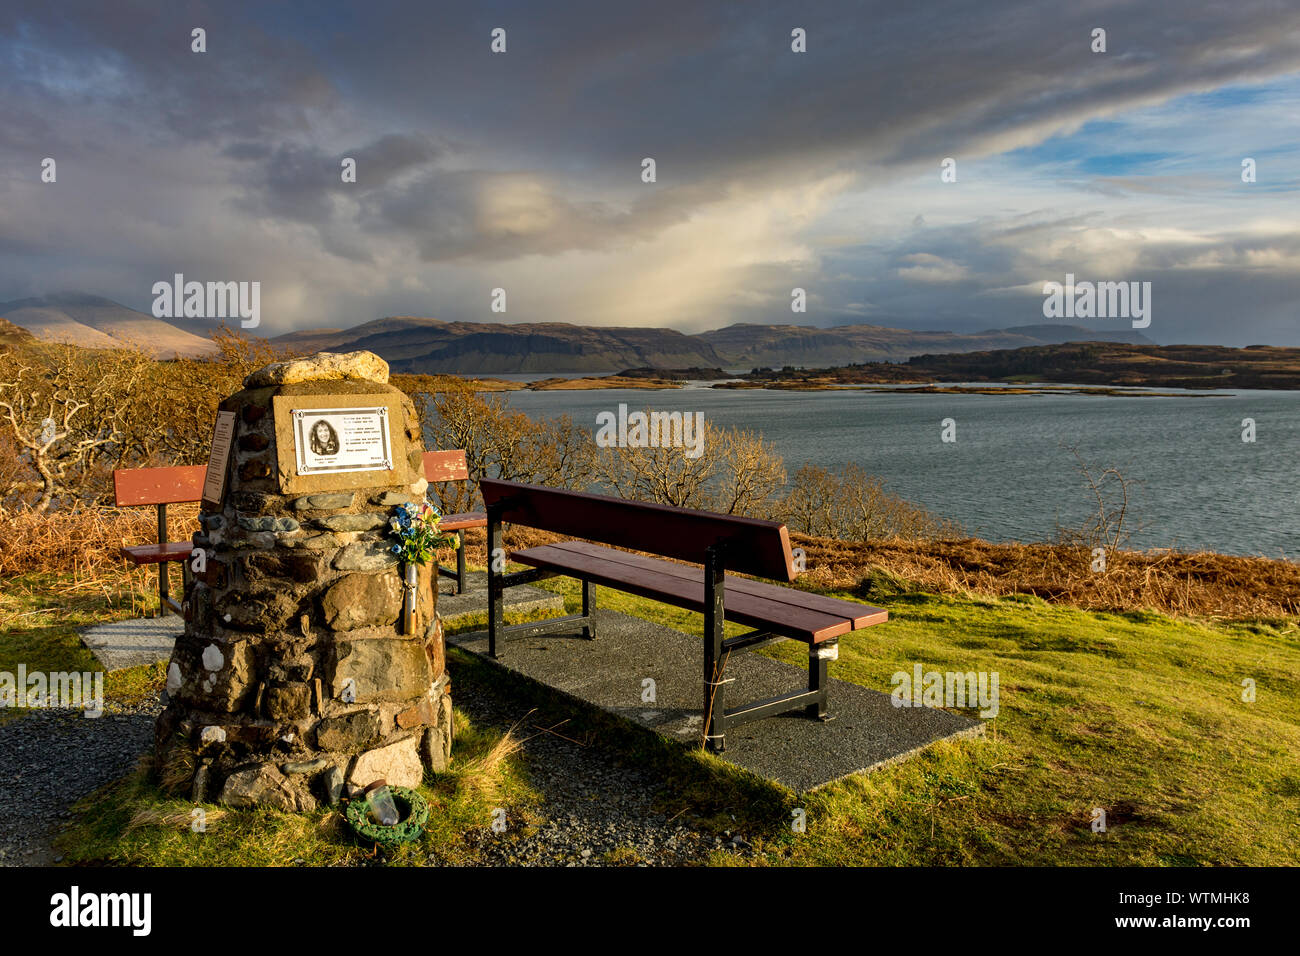 Memorial cairn to Susan Cameron, overlooking Loch Tuath, Isle of Mull, Scotland, UK Stock Photo